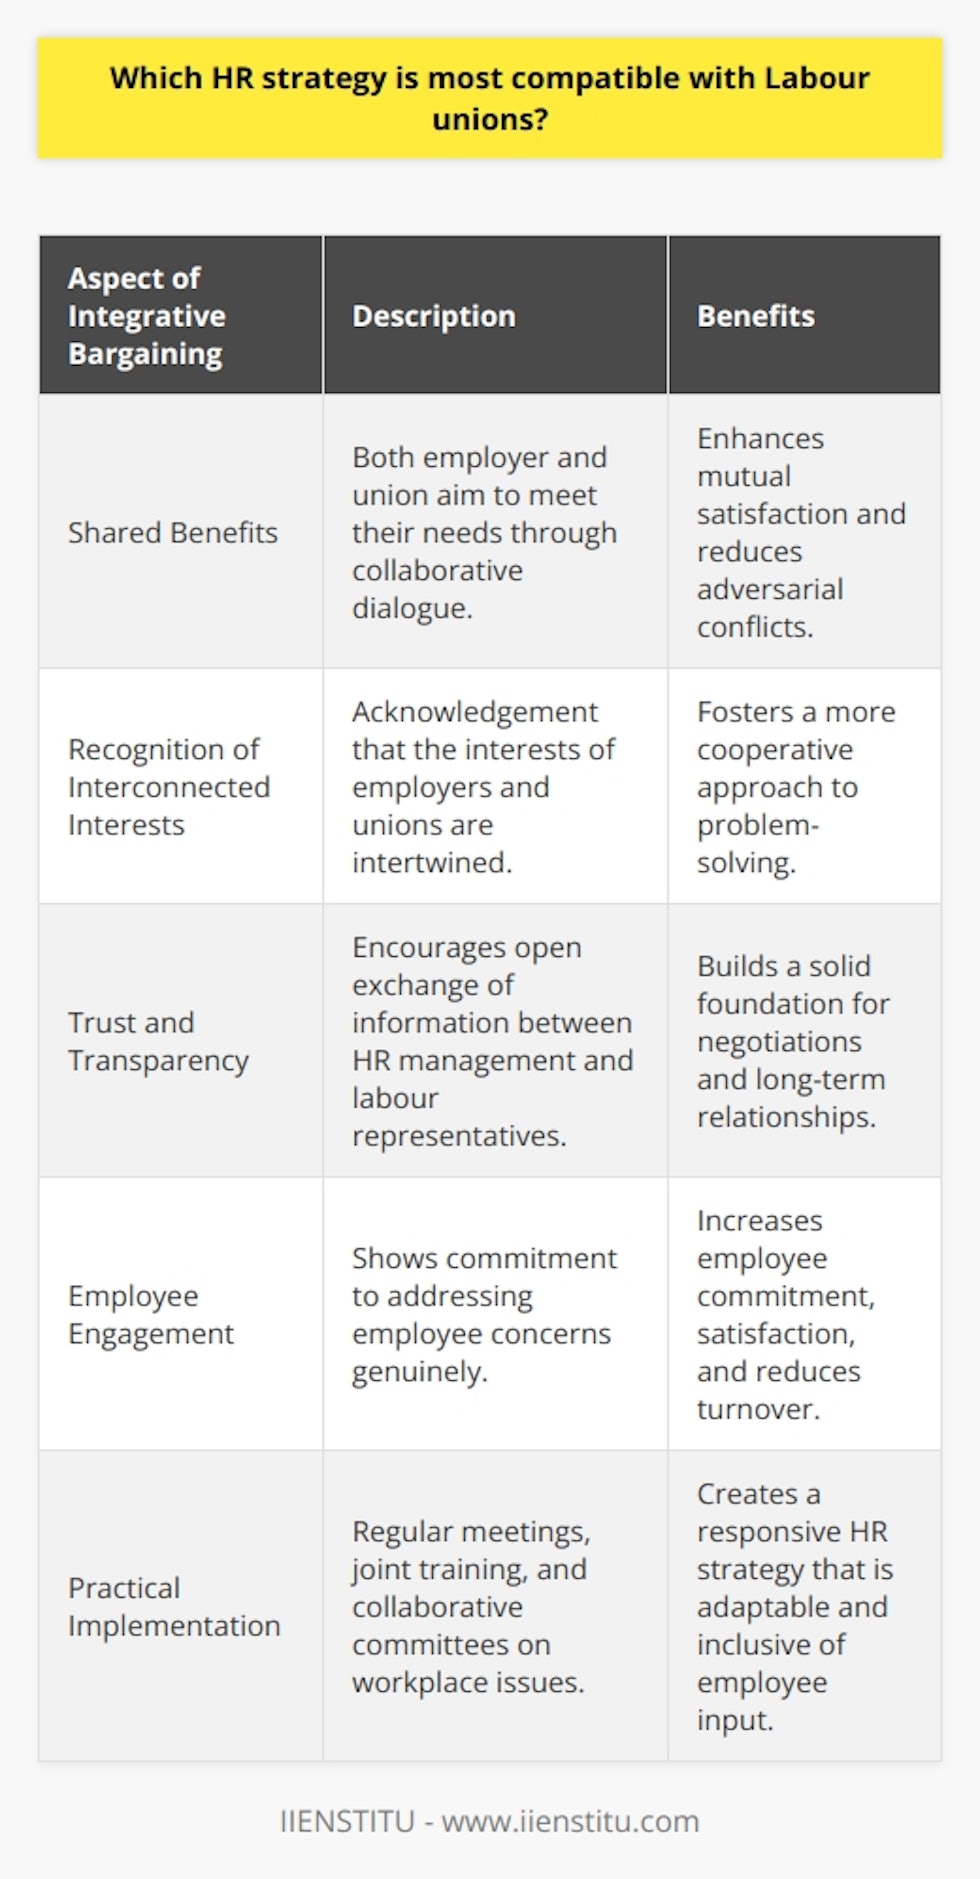 The integrative bargaining approach stands out as the most compatible HR strategy for organizations working in tandem with labour unions. This cooperative strategy is characterized by the pursuit of shared benefits, where both the employer and the union aim to meet their respective needs through open and honest dialogue. This approach stands in contrast to more adversarial negotiating tactics, which can lead to entrenched positions and conflict.One of the core principles of integrative bargaining is the recognition of the interconnectedness of the interests of employers and unions. Instead of focusing solely on their own agendas, both parties work together to explore solutions that bring about improvements for employees while also enhancing organizational performance. This might involve creative problem-solving to address complex issues such as job security, working hours, health and safety, and employee development.The integrative approach also contributes to the development of a transparent and trusting relationship between HR management and labour representatives. Establishing a foundation of trust is pivotal, as it allows for the candid exchange of information and ideas, paving the way for solutions that are acceptable to all involved. This trust is vital for effective negotiation, as it discourages the withholding of information and the playing of zero-sum games where one party's gain is seen as the other's loss.Moreover, the integrative bargaining model promotes employee engagement and satisfaction by showing that their concerns are taken seriously and there is a genuine effort to address them. This can lead to increased commitment from employees and a more harmonious workplace overall, which, in turn, reduces costly turnover and enhances productivity.In terms of practical implementation, HR strategies that align with integrative bargaining often involve regular meetings with union representatives, joint training sessions on negotiation and problem-solving, and the establishment of collaborative committees that focus on specific workplace issues. Employers and unions might also work together on communication strategies to ensure that all employees are kept informed and can contribute to the ongoing dialogue.The integrative bargaining approach is not only beneficial during formal contract negotiations but also serves as a guiding principle for the day-to-day relationship between HR and labour unions. By committing to this approach, organizations can create a more responsive and adaptive HR strategy that aligns with the dynamic context of modern labour relations.In summary, the integrative bargaining approach represents an HR strategy that aligns perfectly with the ethos of labour unions, which is built on collective action and mutual support. This method delivers a robust framework for constructive engagement, where the joint targeting of cooperative wins becomes the cornerstone of sustainable labour-management relations.